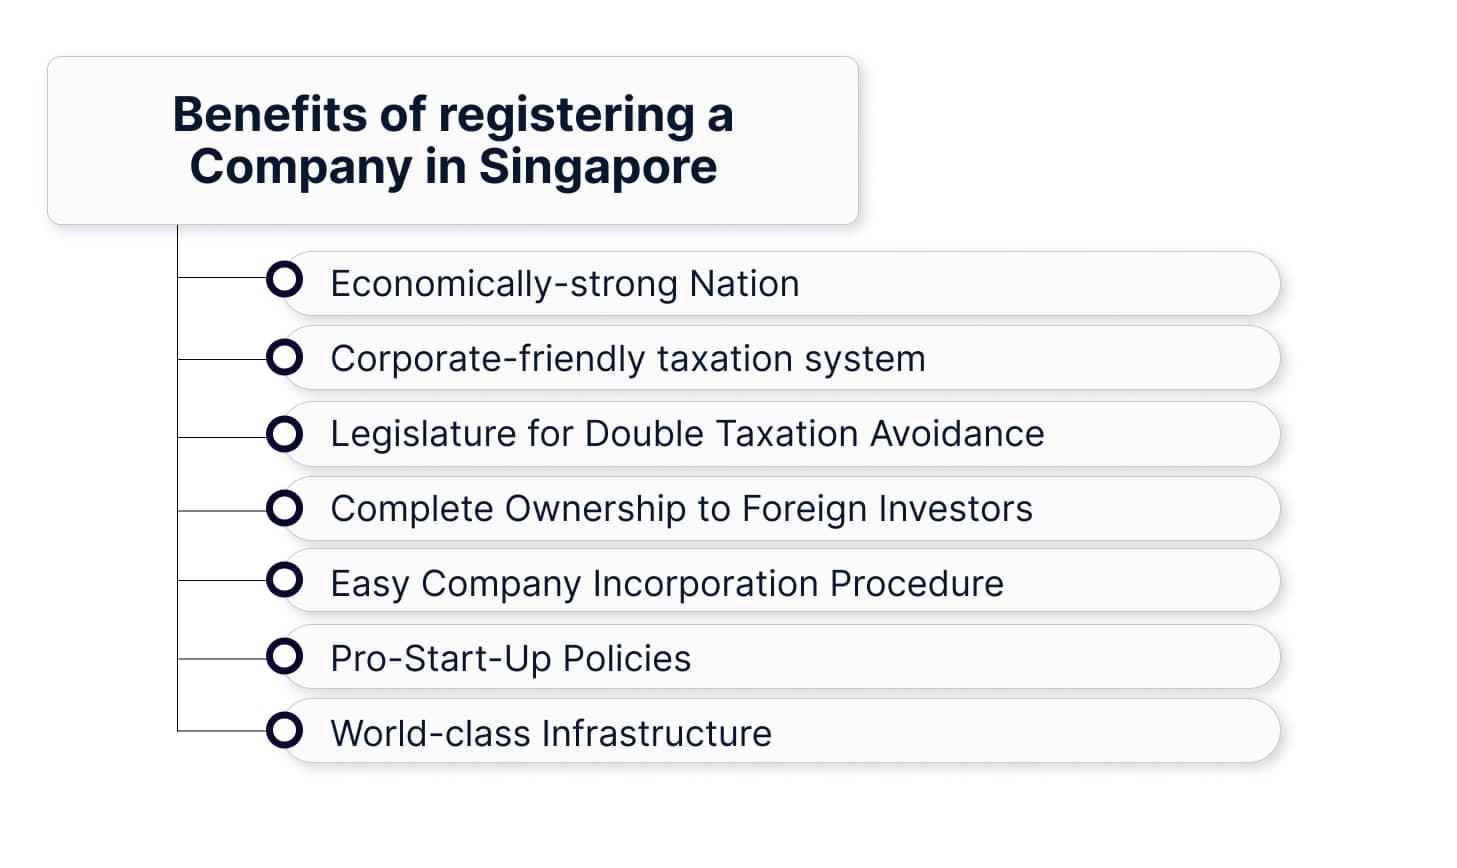 Register Company in Singapore - Benefits